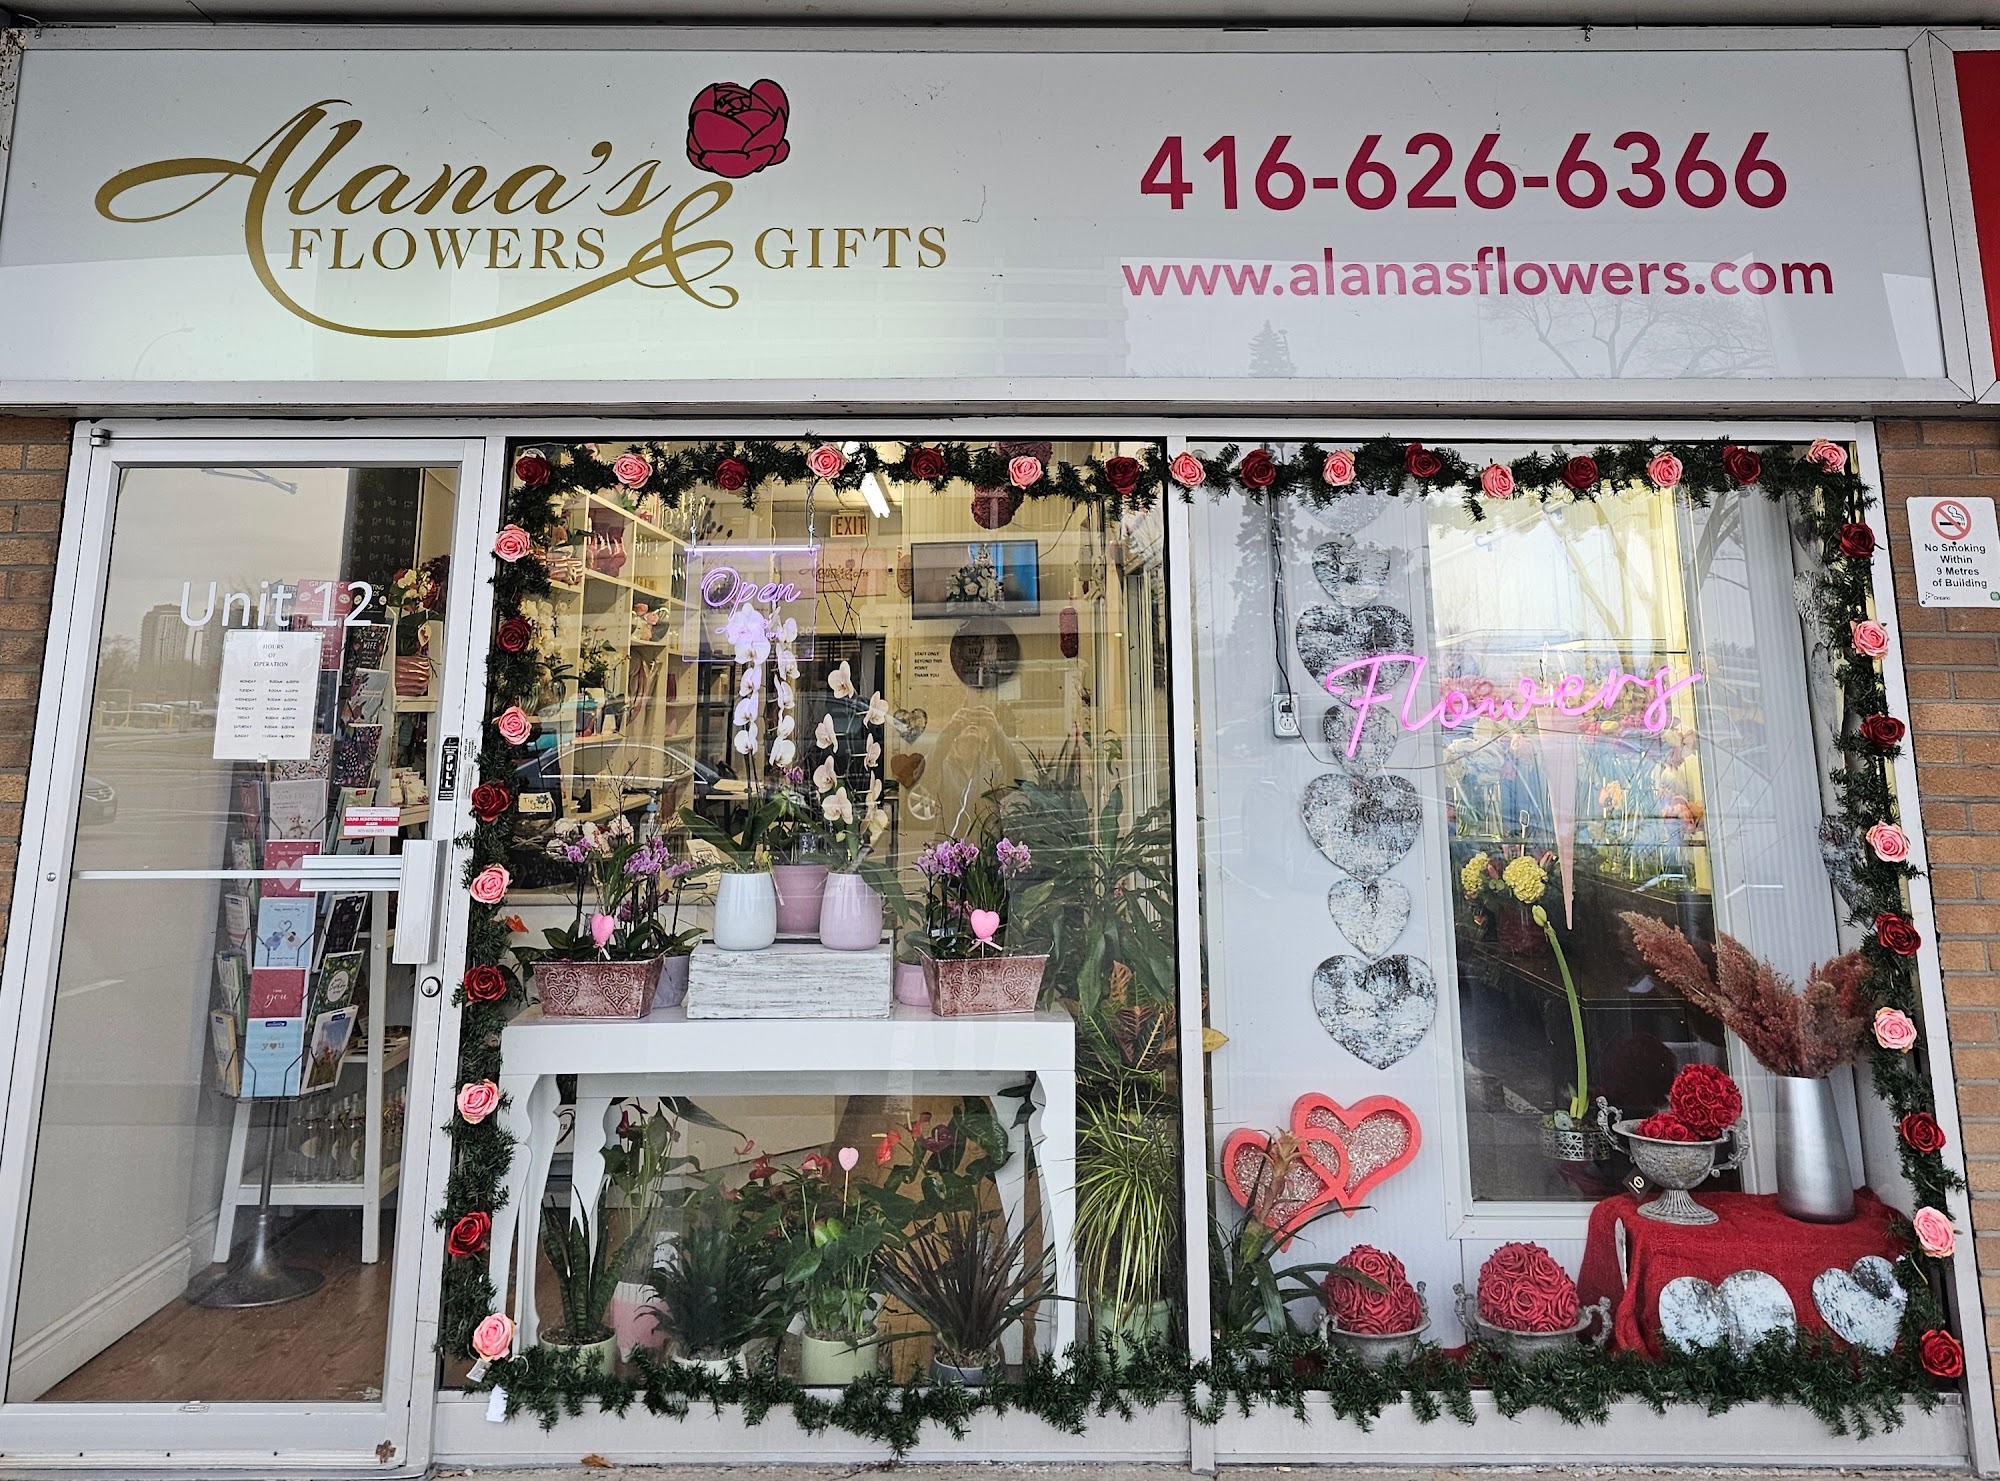 Alana's Flowers & Gifts